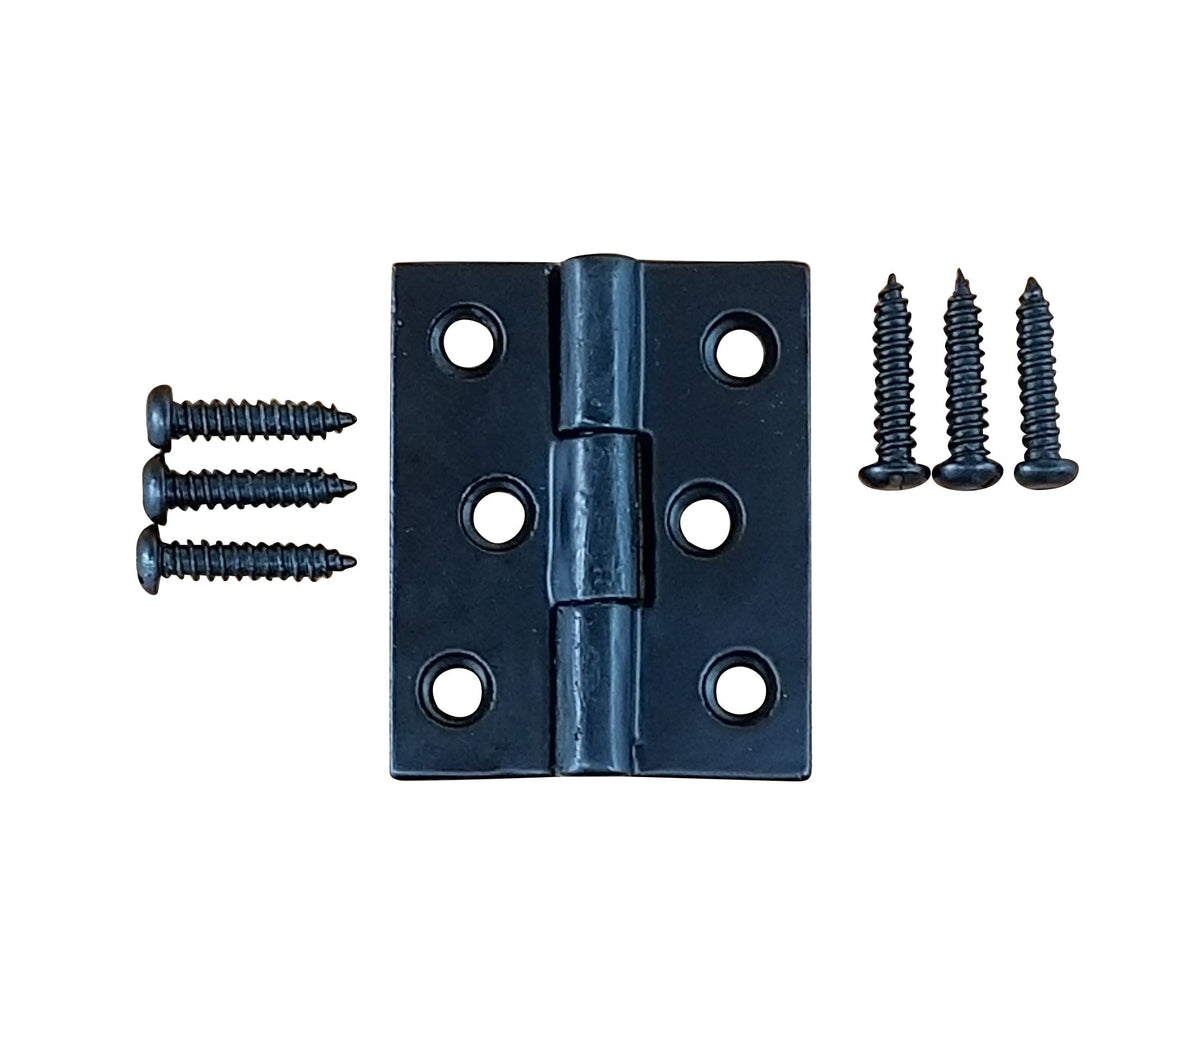 Black Solid Iron Surface Mounted Small Hinges For Cabinets - 1 5/8" X 2" - Sold Individually